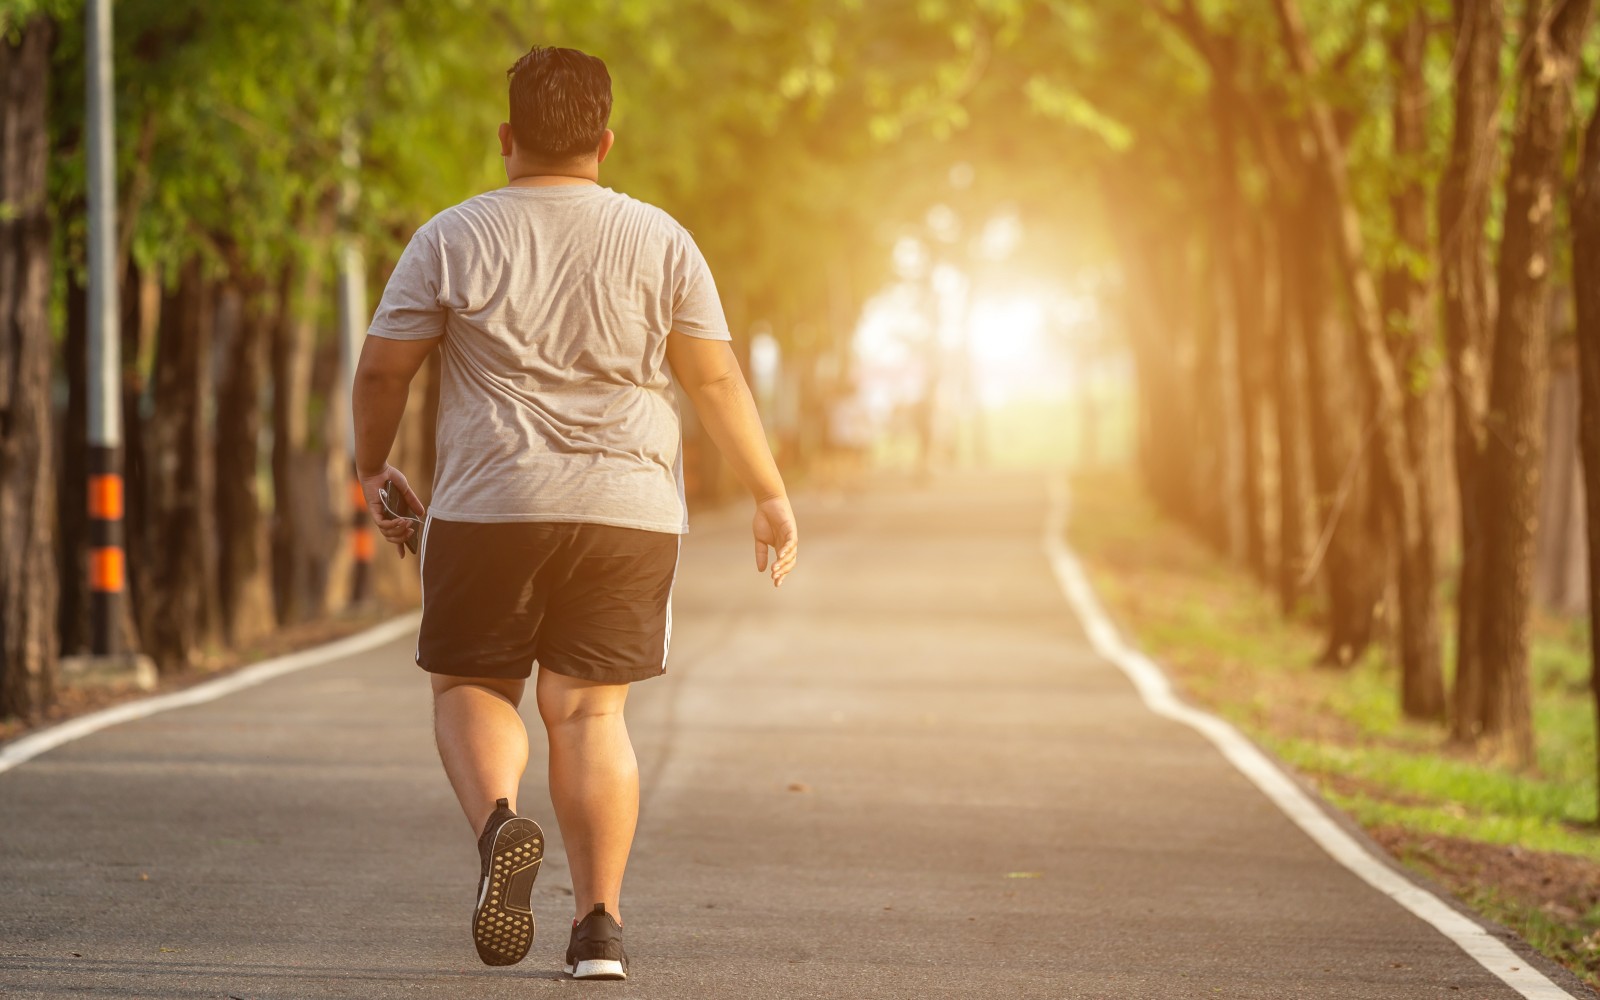 Exercise and healthy concept : Fat man running in the park